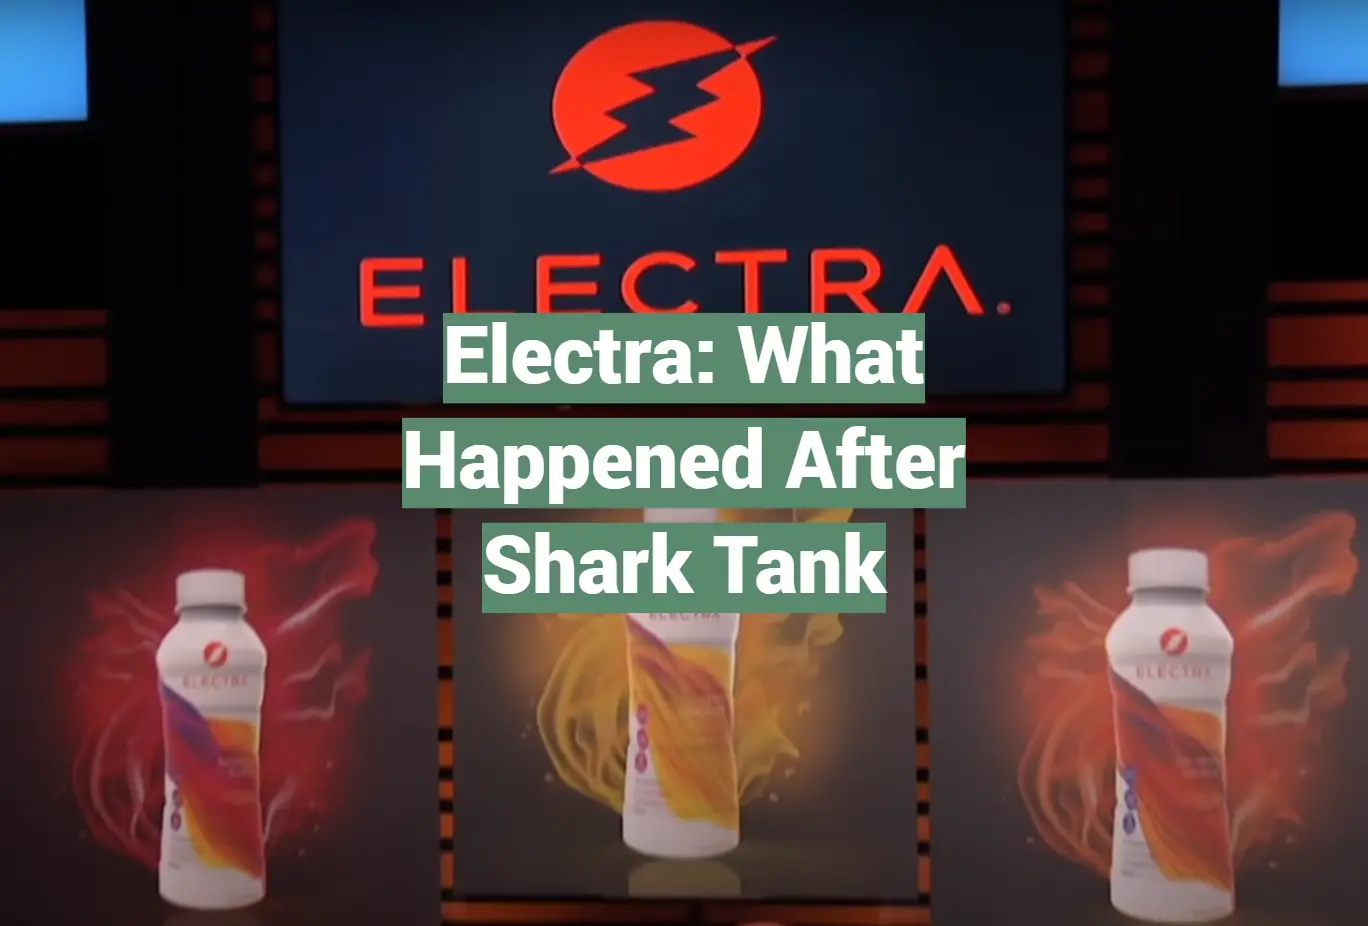 Electra: What Happened After Shark Tank